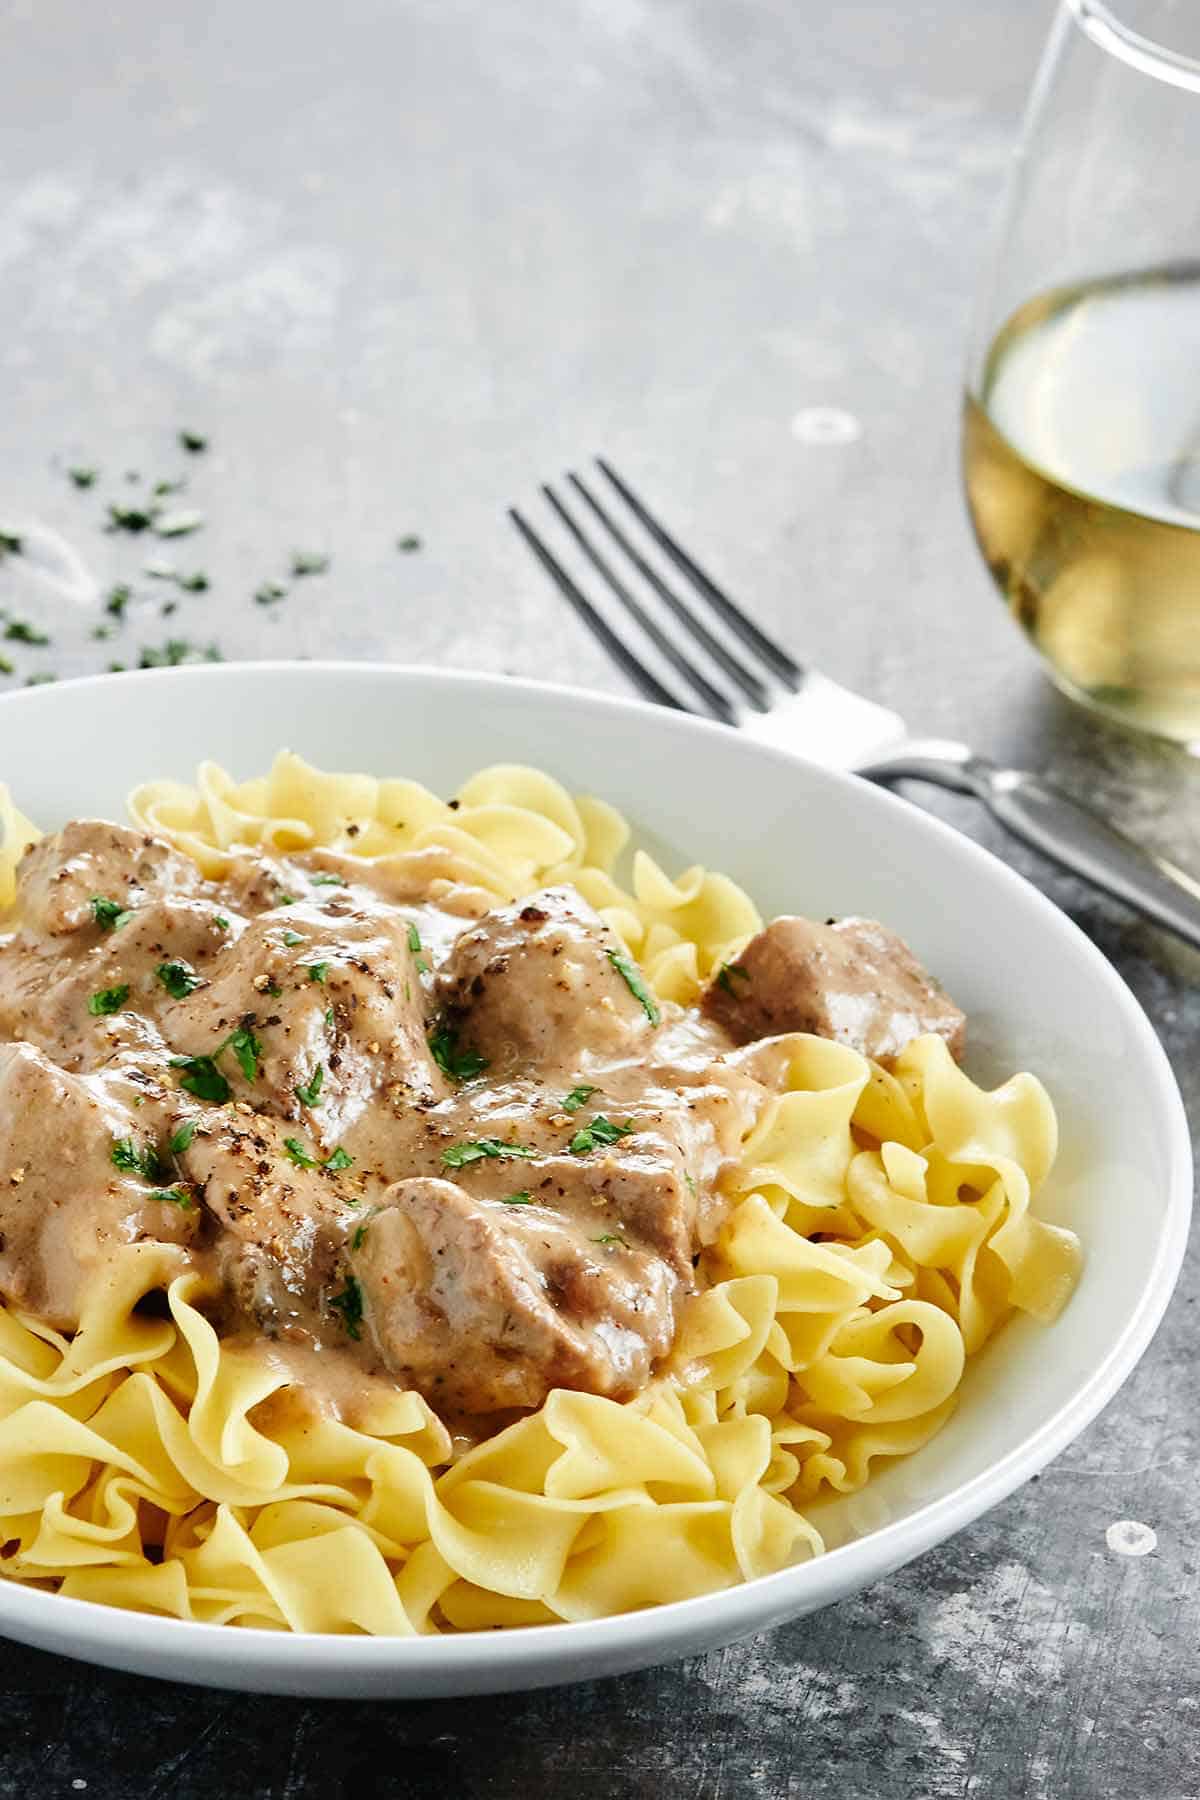 Crock pot beef stroganoff with egg noodles on a plate. Cup of white wine in background